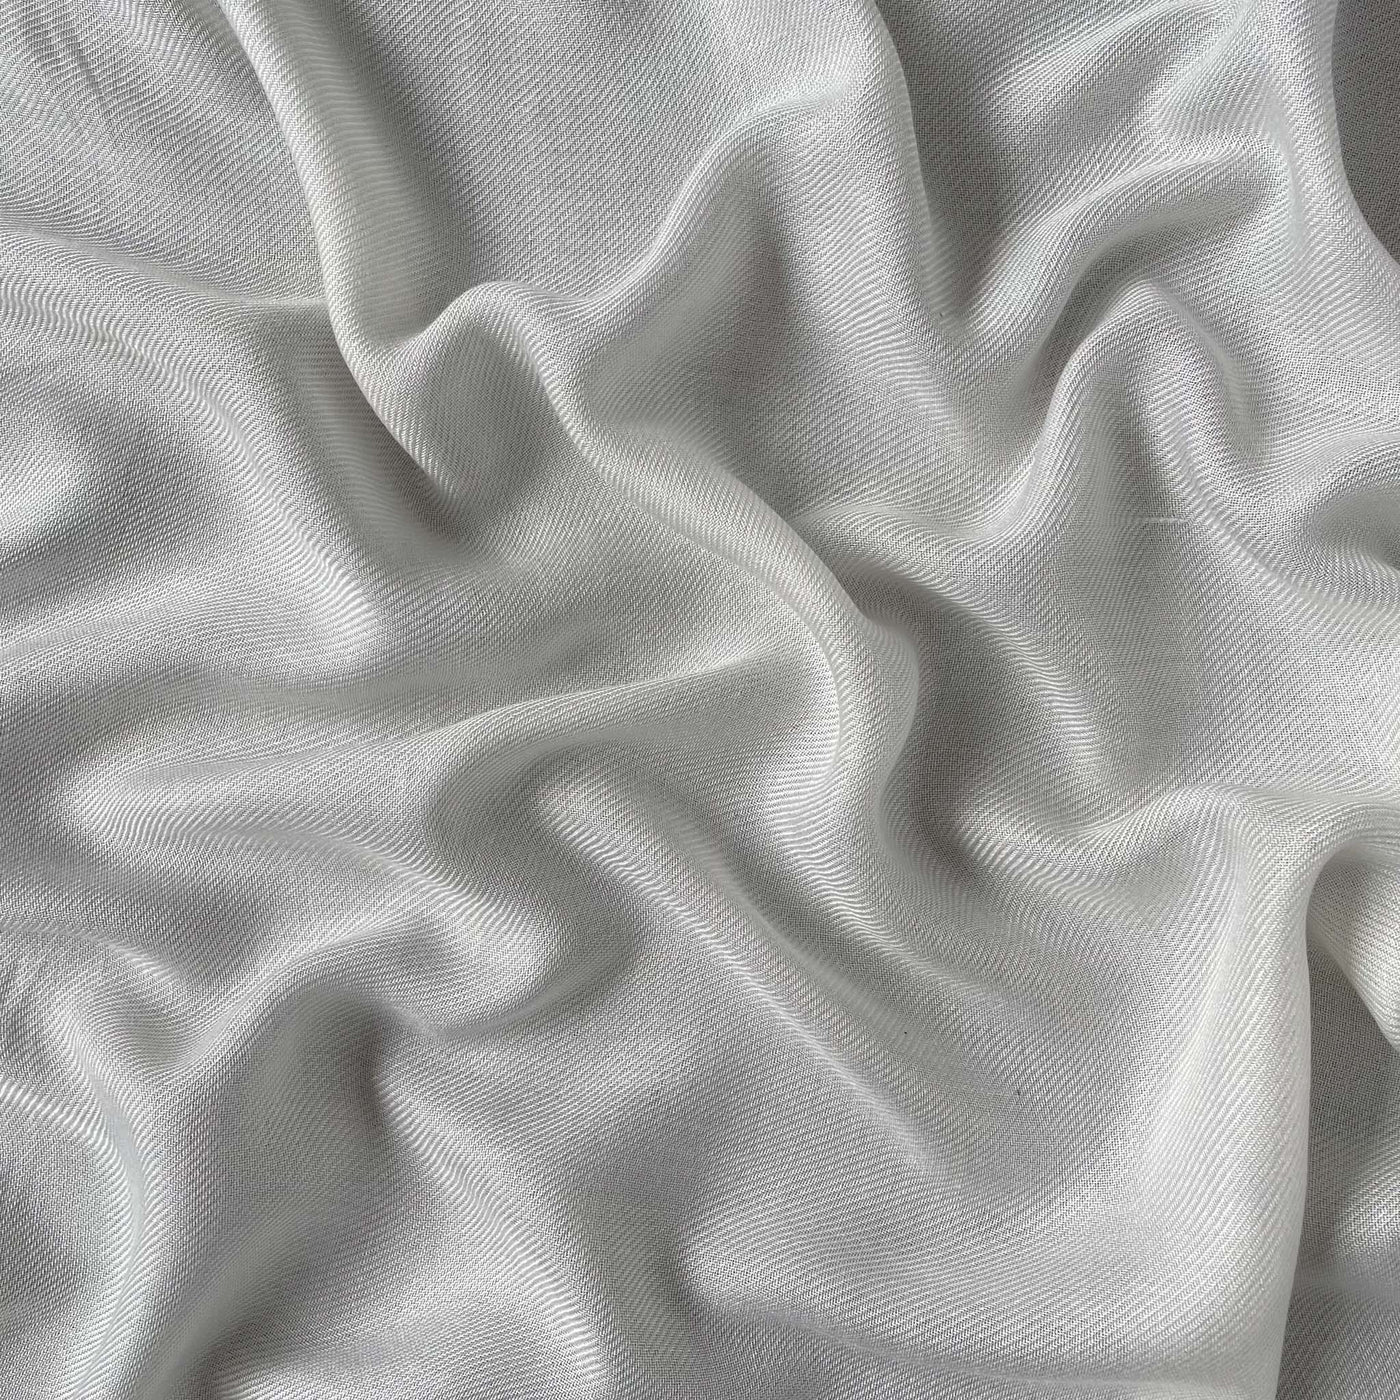 Fabric Pandit Fabric White Dyeable Pure Viscose Rayon Twill Plain Fabric (Width 36 Inches, 89 Gms)